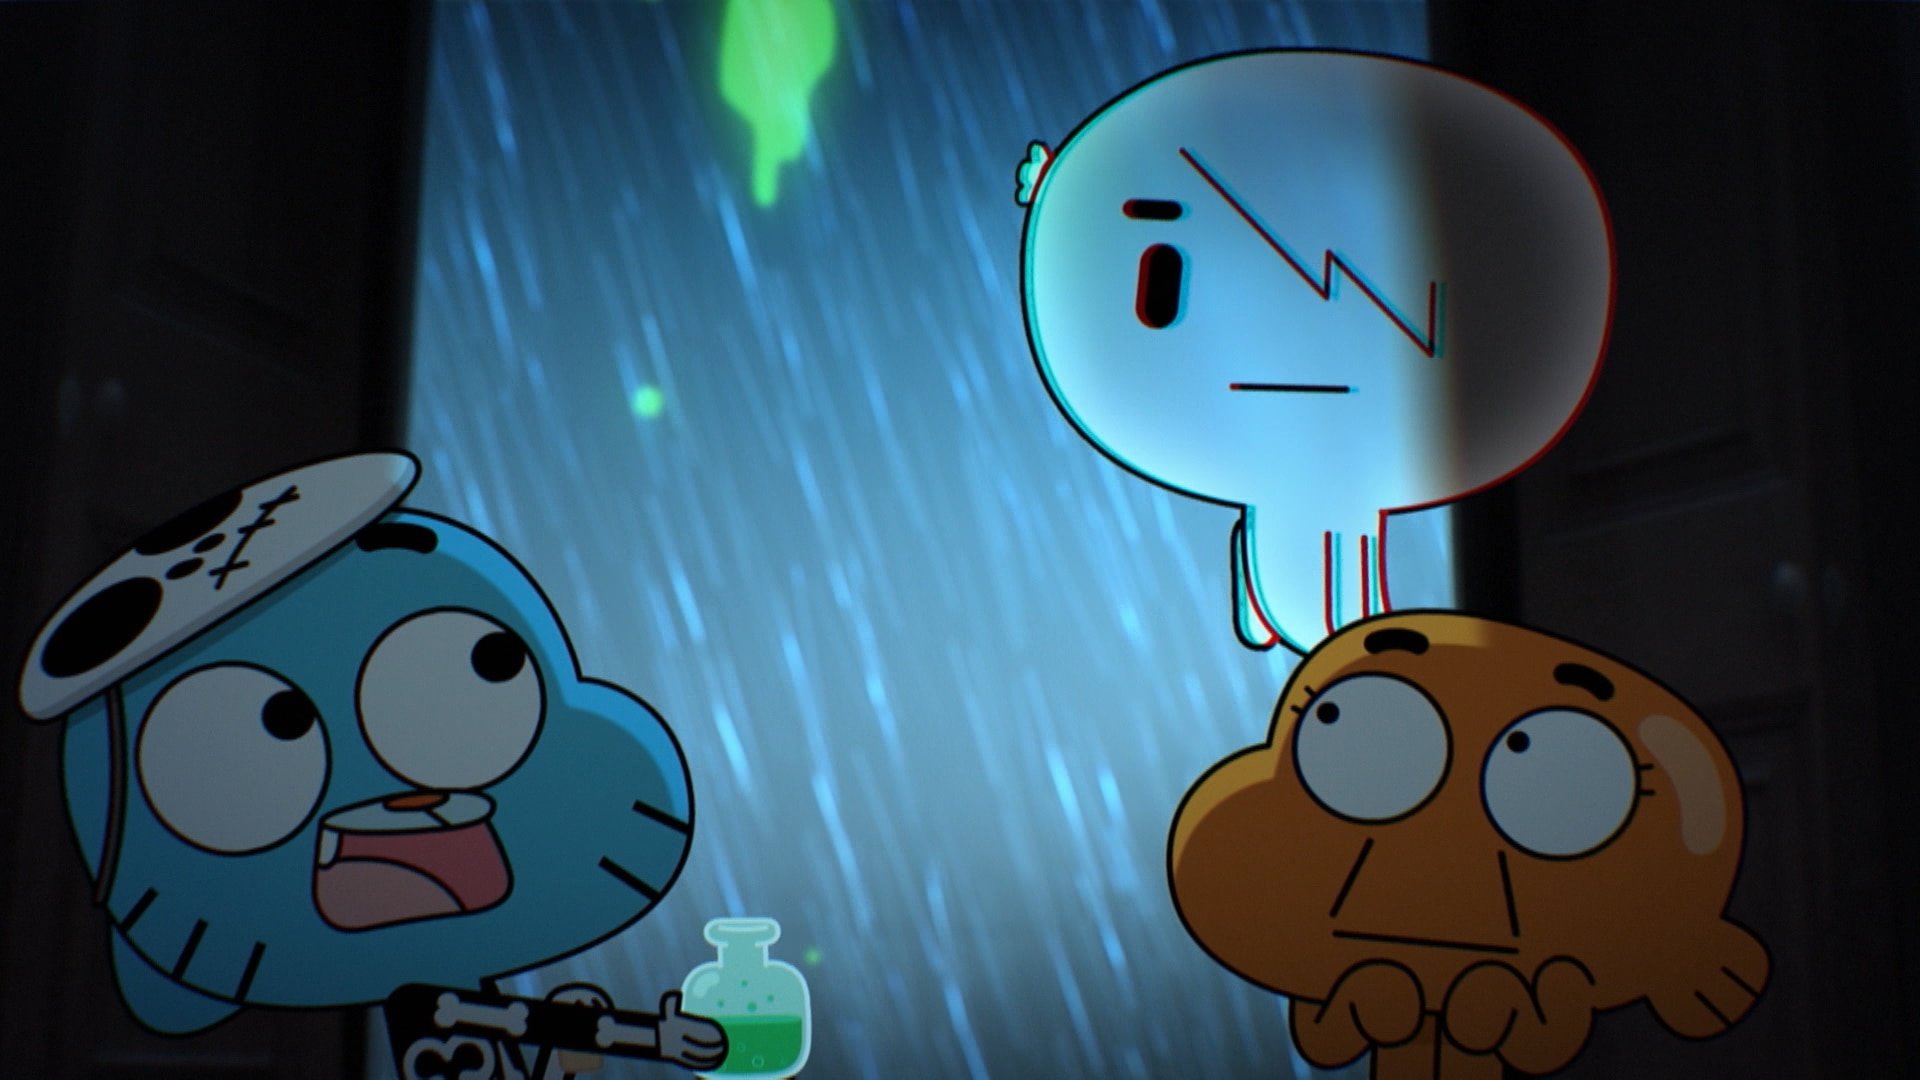 CN Brings Back 'Gumball' with Special “Darwin's Yearbook” Episodes